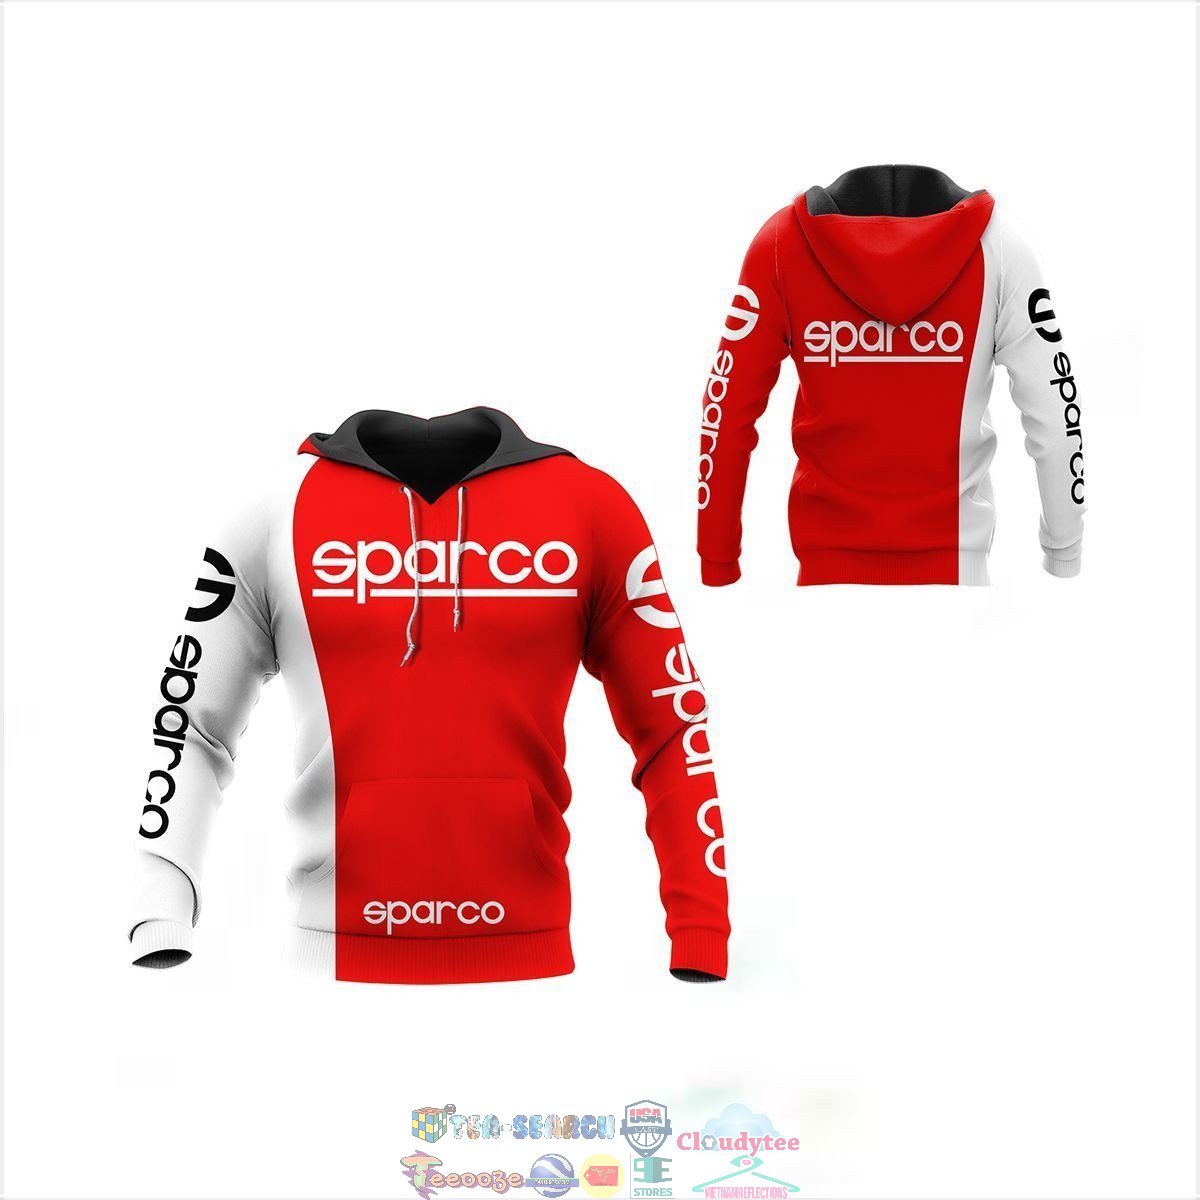 Sparco ver 40 3D hoodie and t-shirt